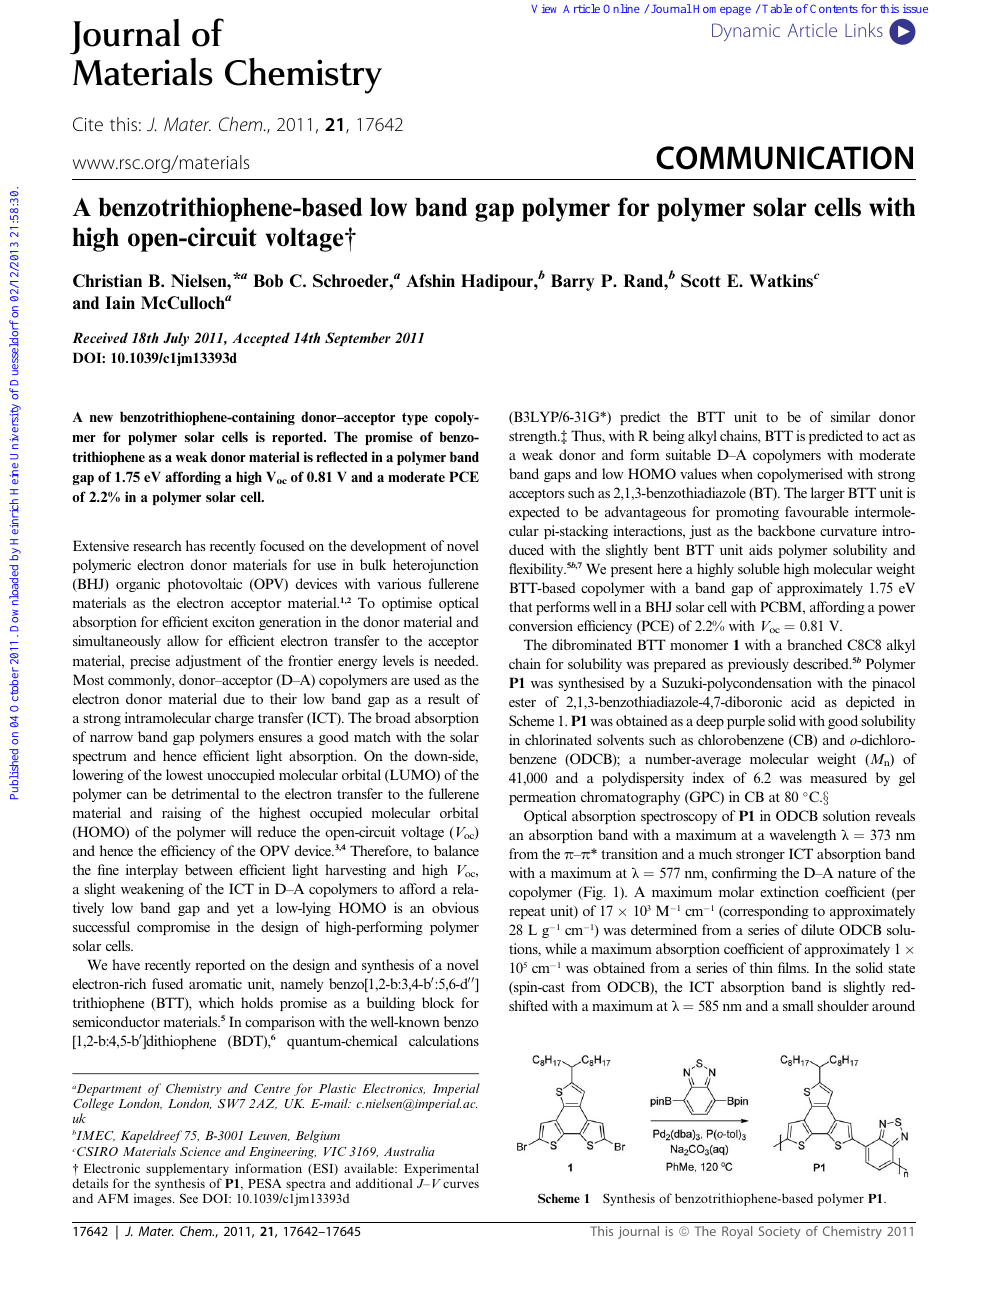 A Benzotrithiophene Based Low Band Gap Polymer For Polymer Solar Cells With High Open Circuit Voltage Topic Of Research Paper In Chemical Sciences Download Scholarly Article Pdf And Read For Free On Cyberleninka